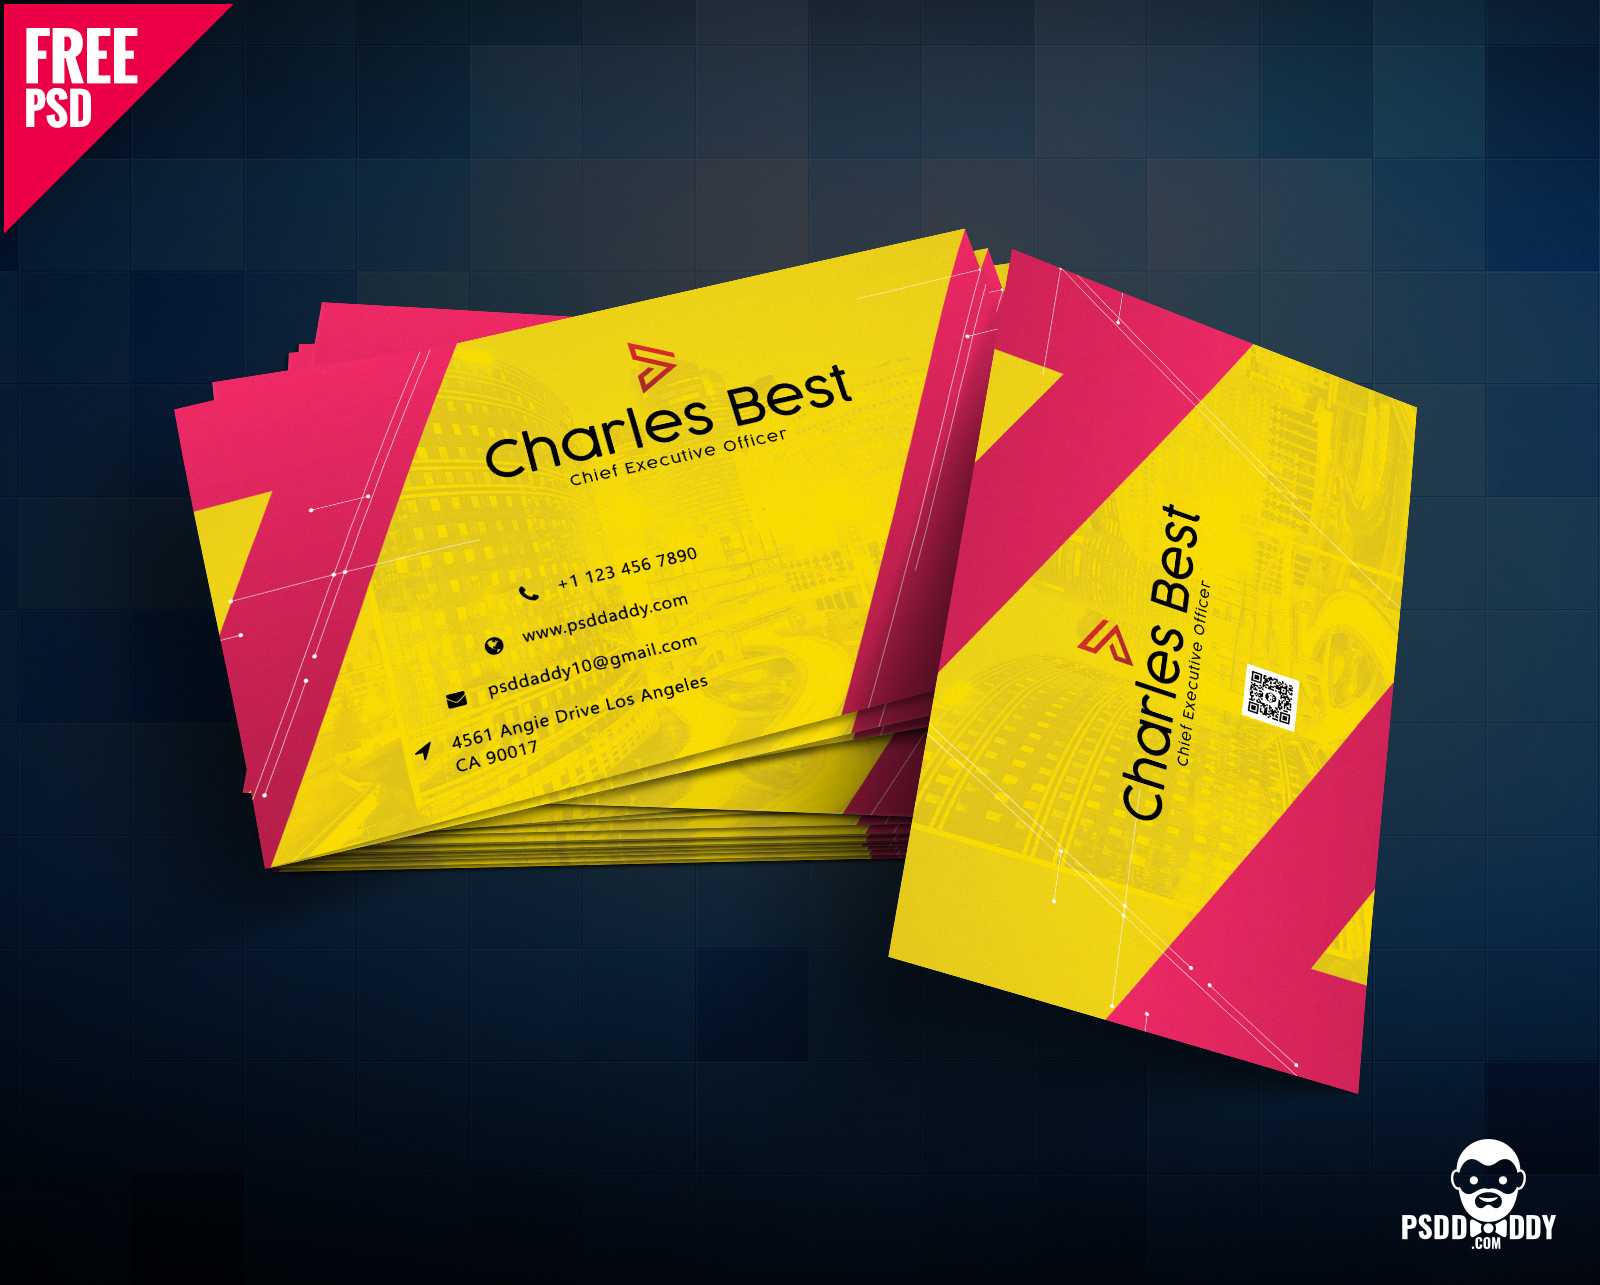 Download] Creative Business Card Free Psd | Psddaddy Intended For Photoshop Cs6 Business Card Template